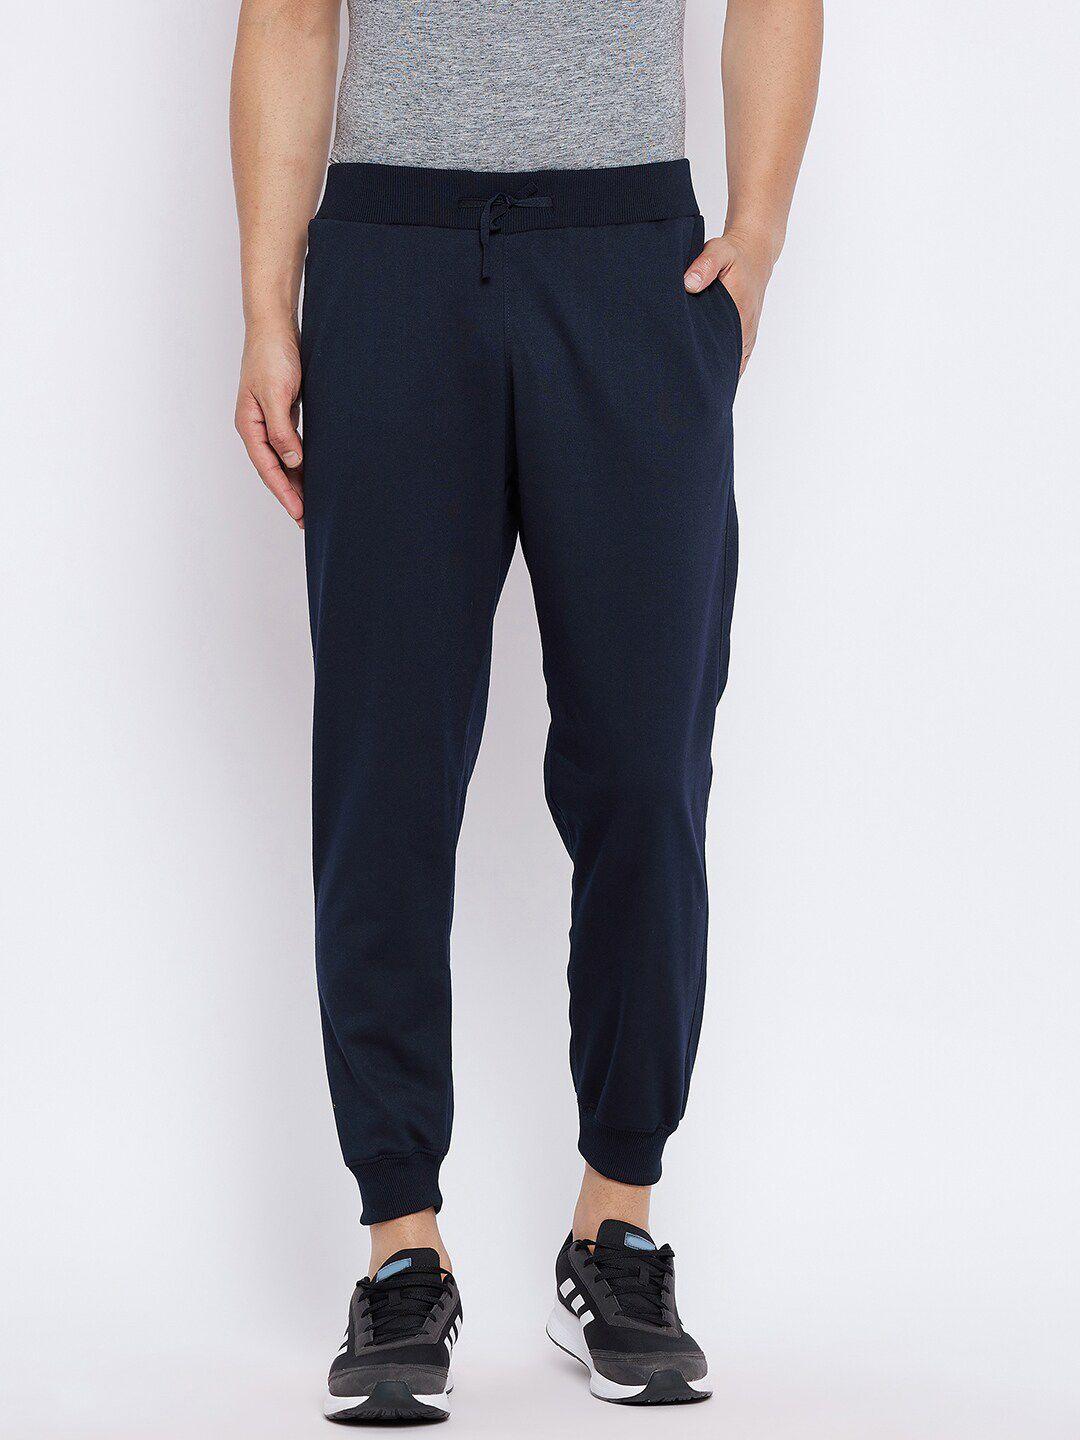 french flexious men navy blue relaxed fit jogger